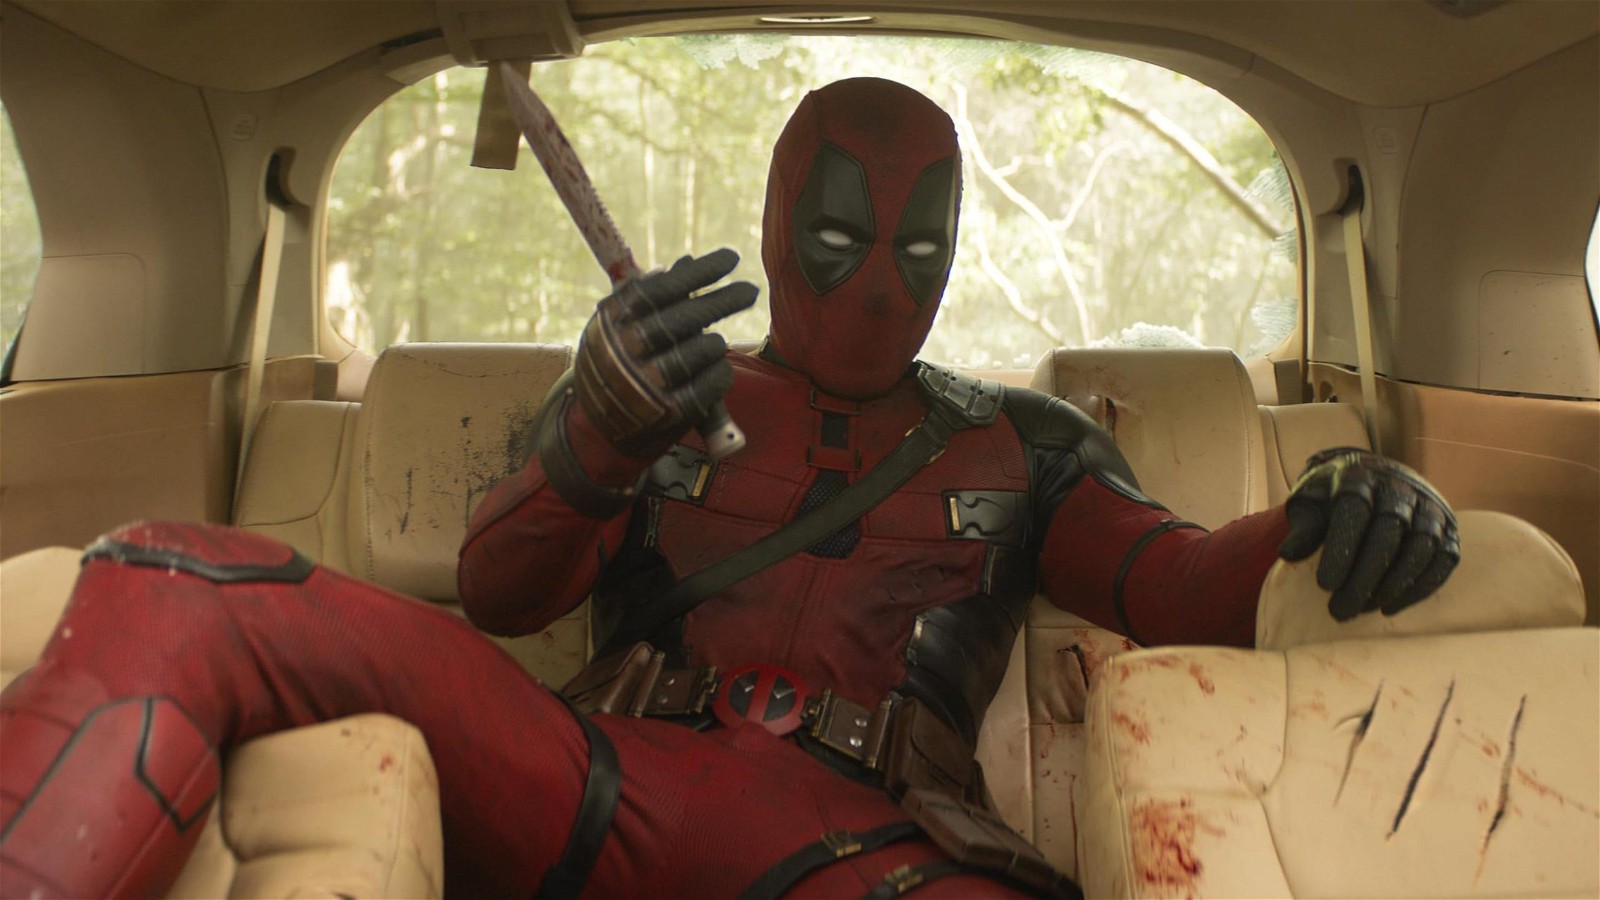 Shawn Levy is incredibly confident about Deadpool & Wolverine